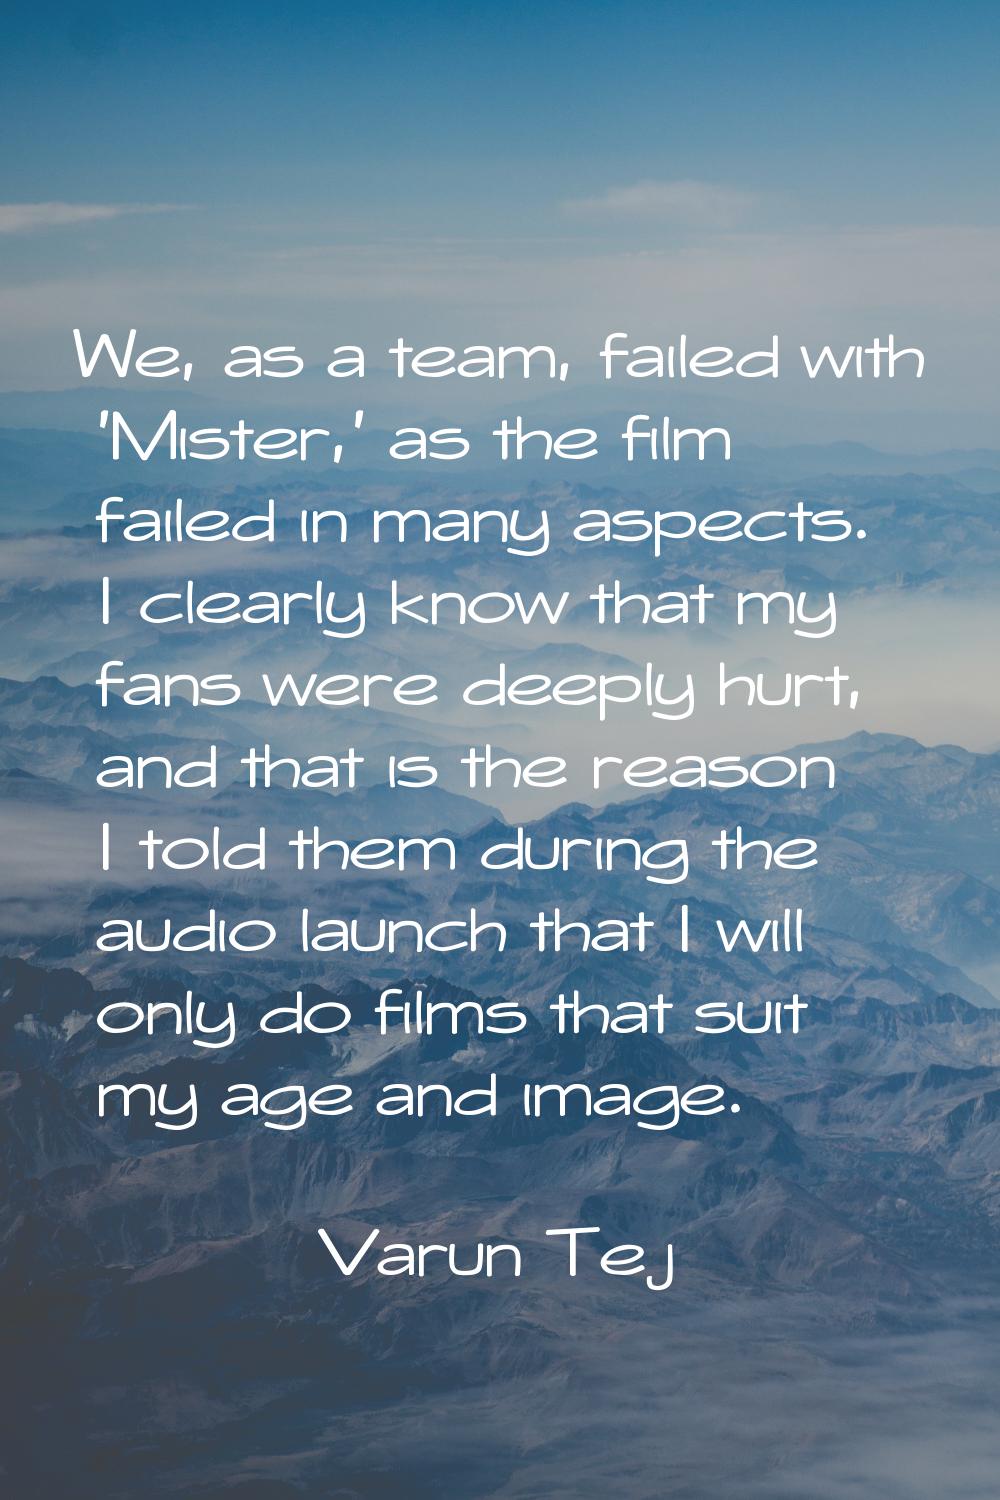 We, as a team, failed with 'Mister,' as the film failed in many aspects. I clearly know that my fan